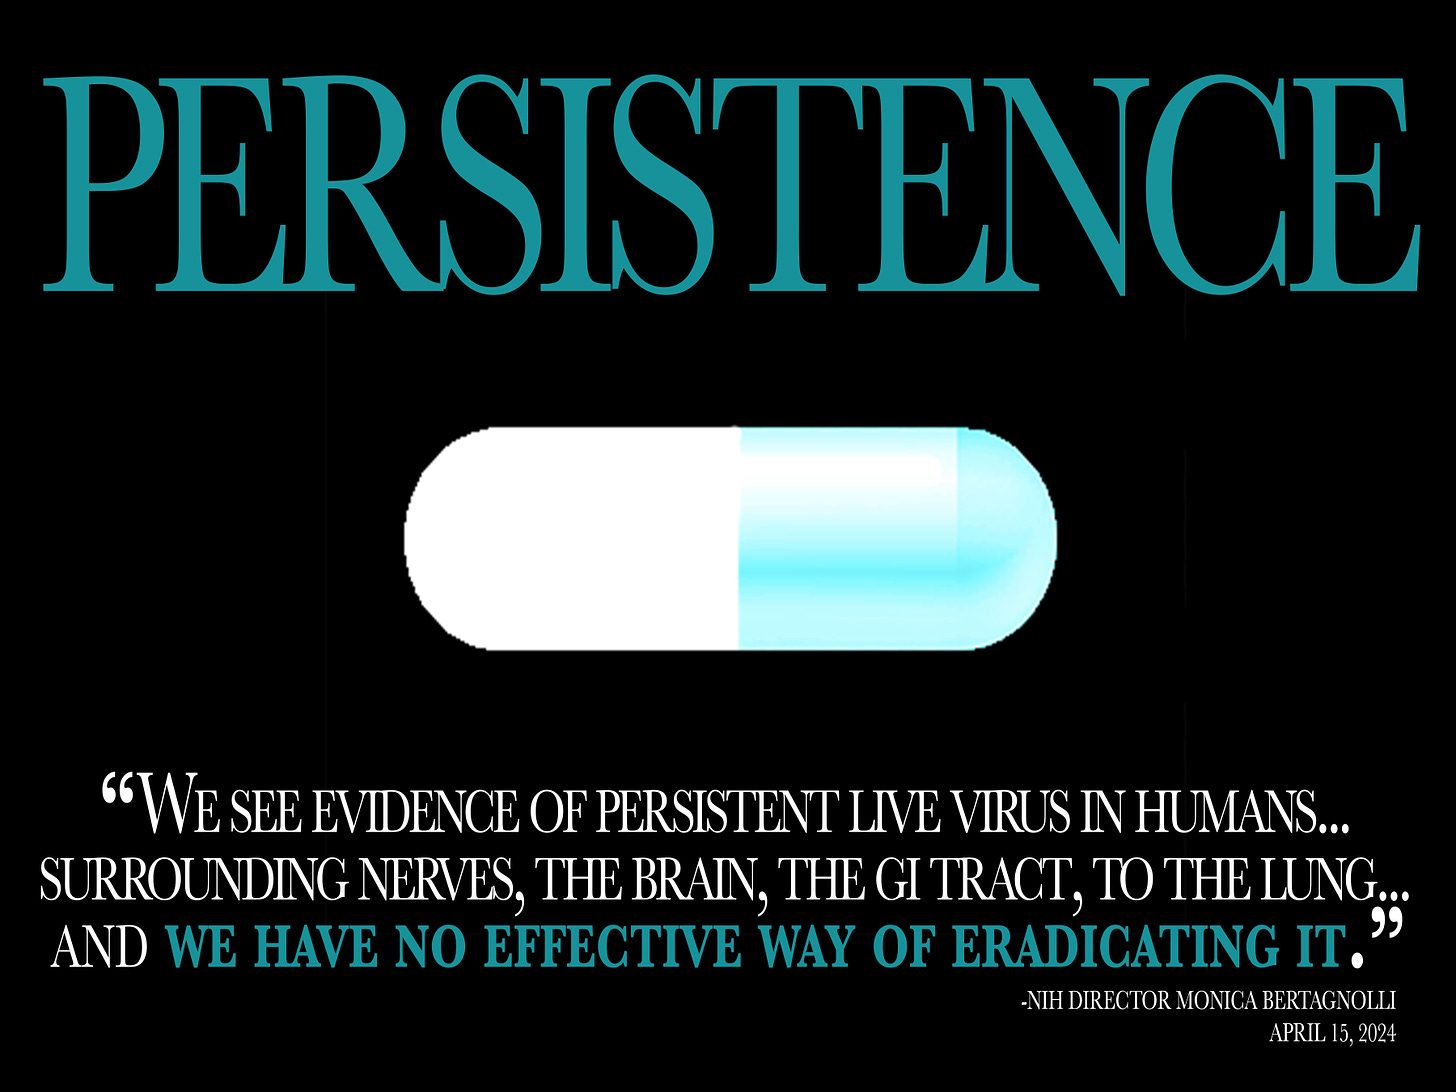 “We see evidence of persistent live virus in humans... surrounding nerves, the brain, the gi tract, to the lung... and we have no effective way of eradicating it.” A black background poster with a blue and white pill in the middle reads "PERSISTENCE" in all caps, with the aforementioned text across the bottom.